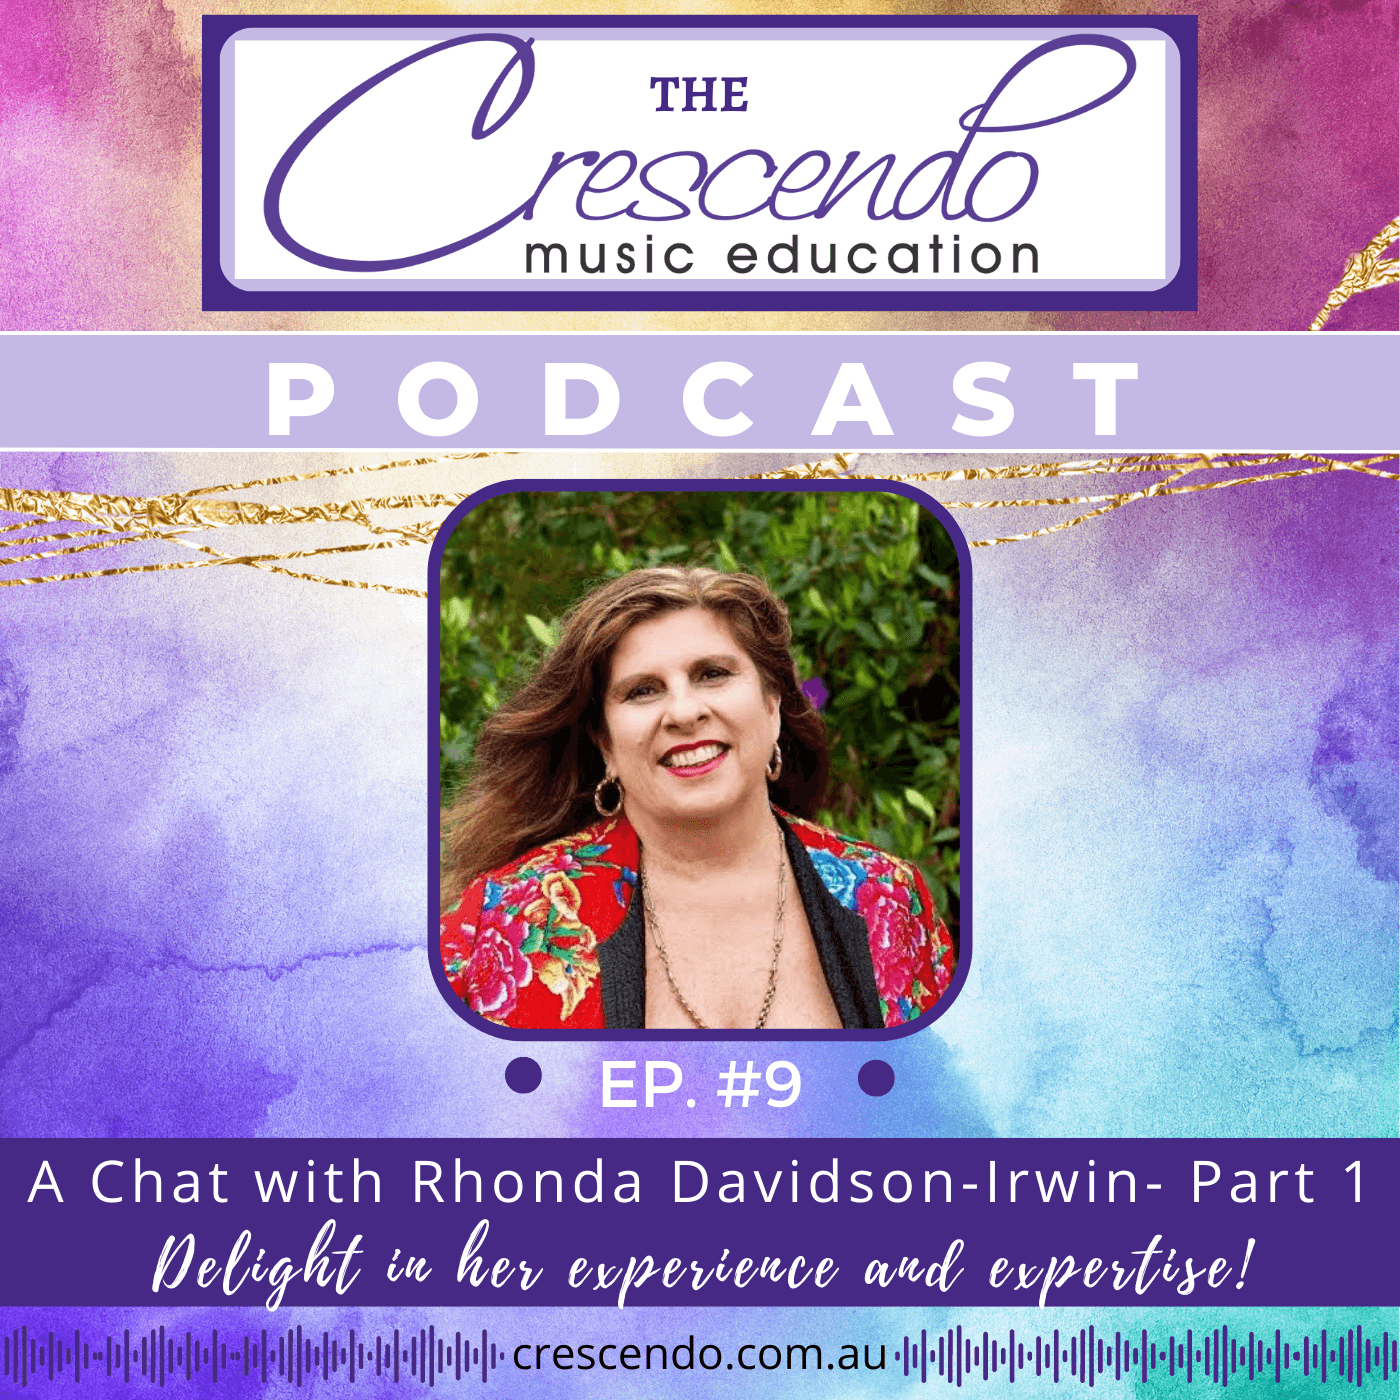 Rhonda is an expert in the field of early childhood education, television and music. She has put her love of music and education together.